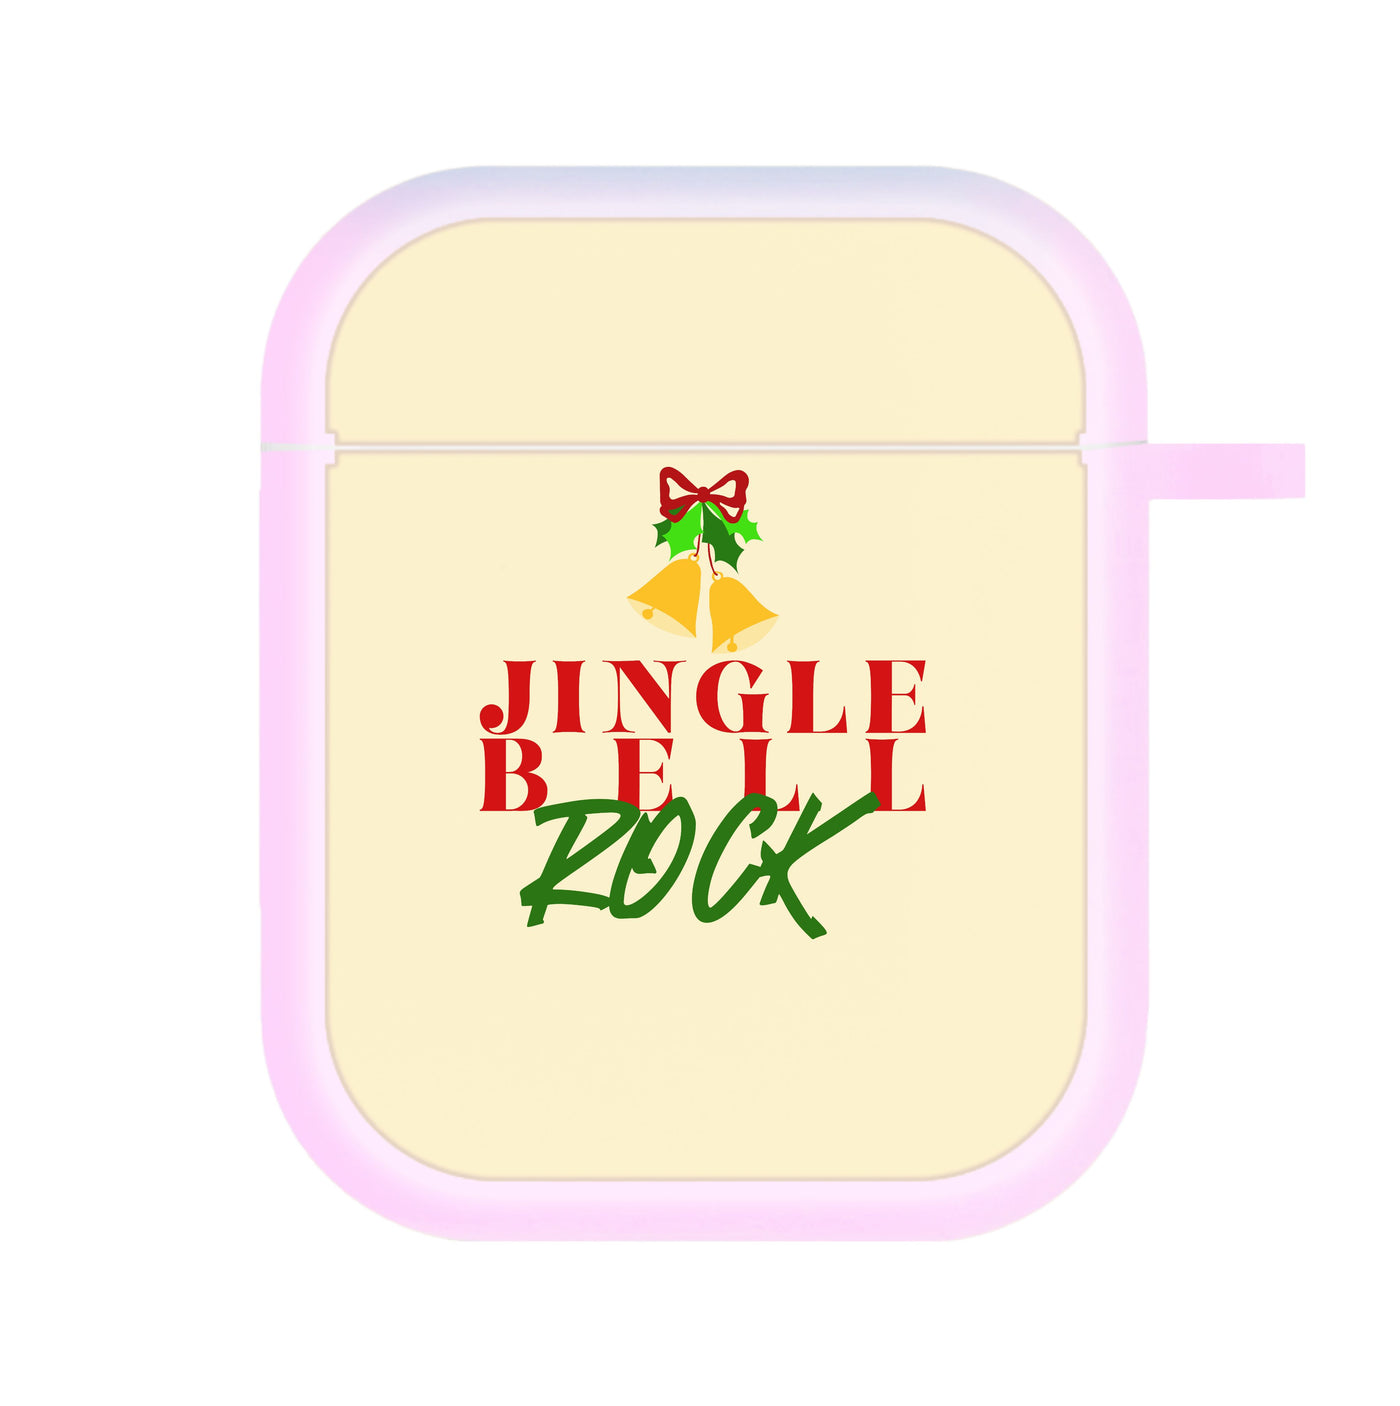 Jingle Bell Rock - Christmas Songs AirPods Case